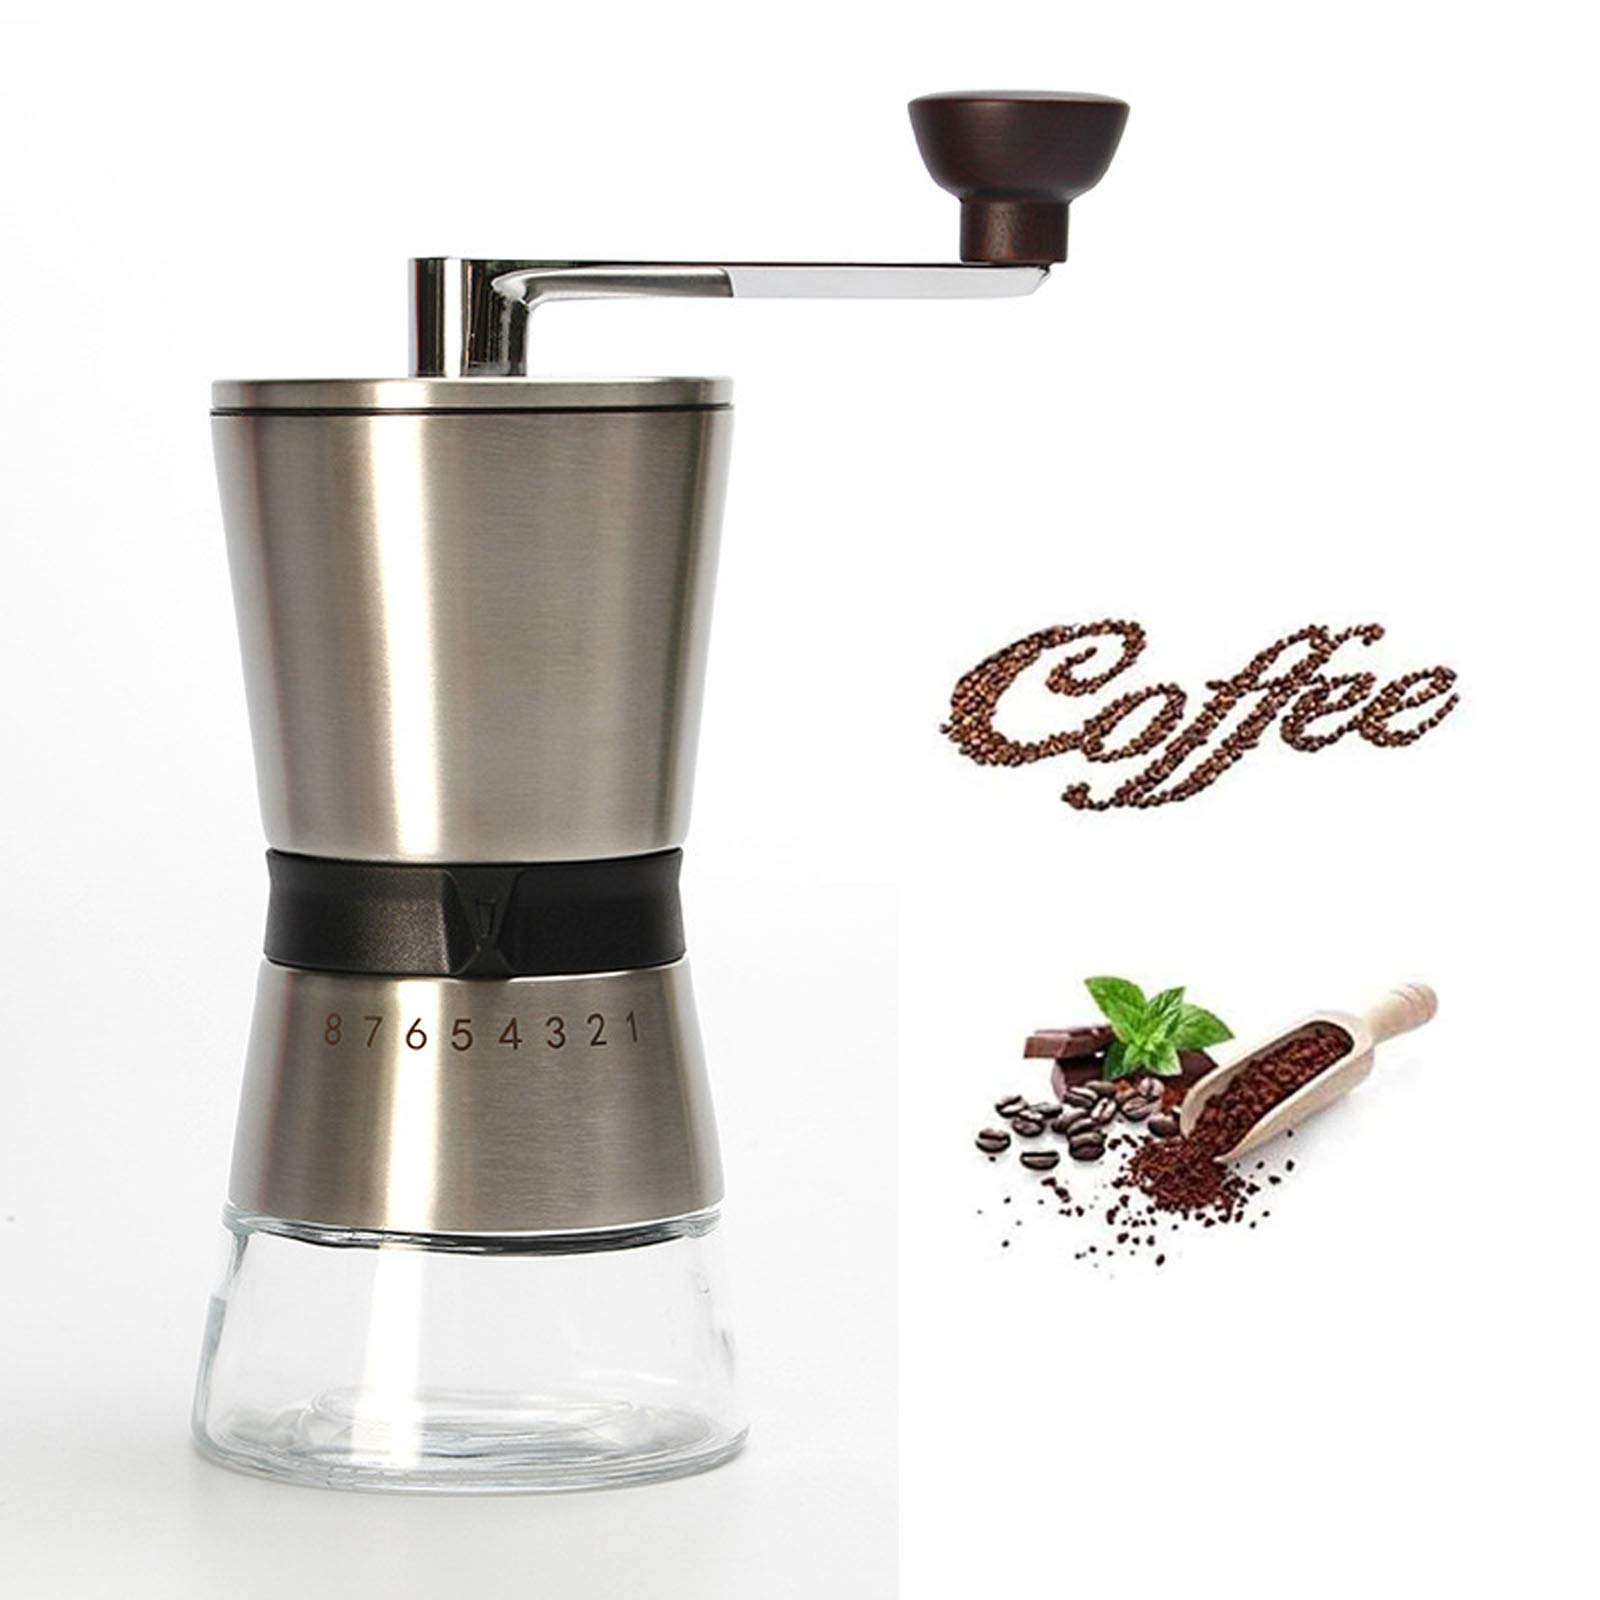 QJJML Manual Coffee Grinder - Hand Coffee Mill with Conical Ceramic Burrs 8 Adjustable Settings - Portable Hand Crank